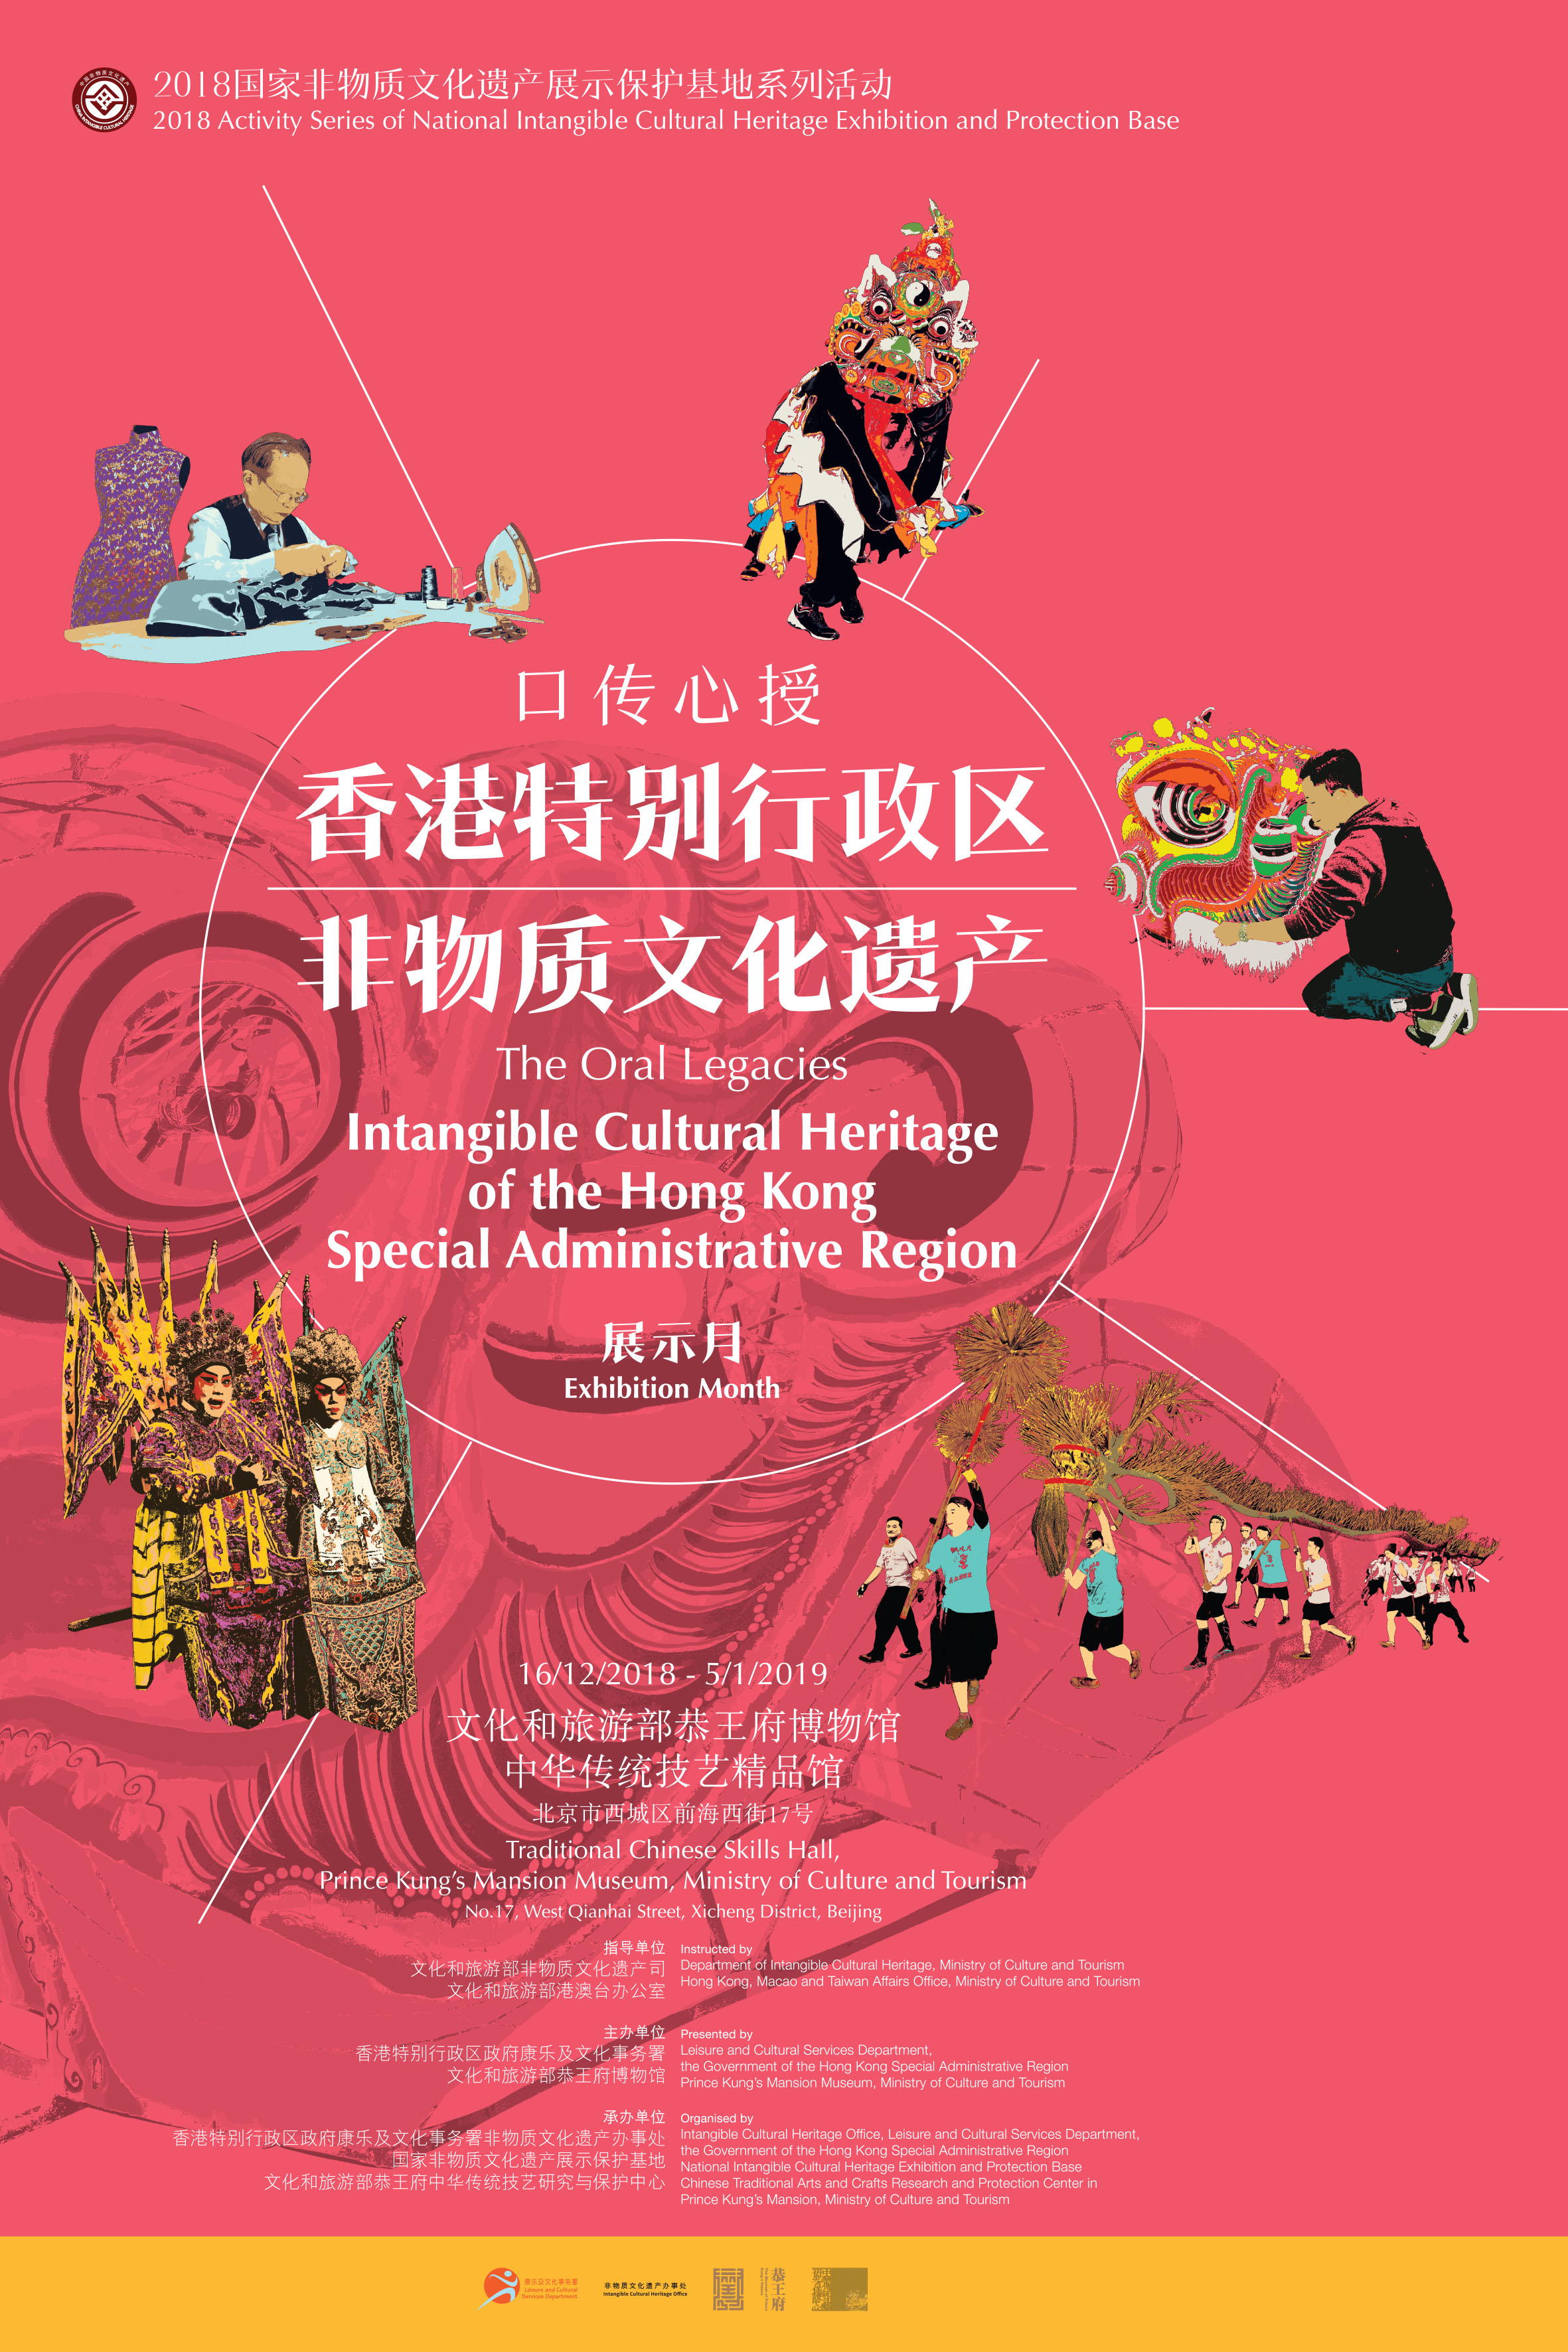 "The Oral Legacies: Intangible Cultural Heritage of the Hong Kong Special Administrative Region" Exhibition Month